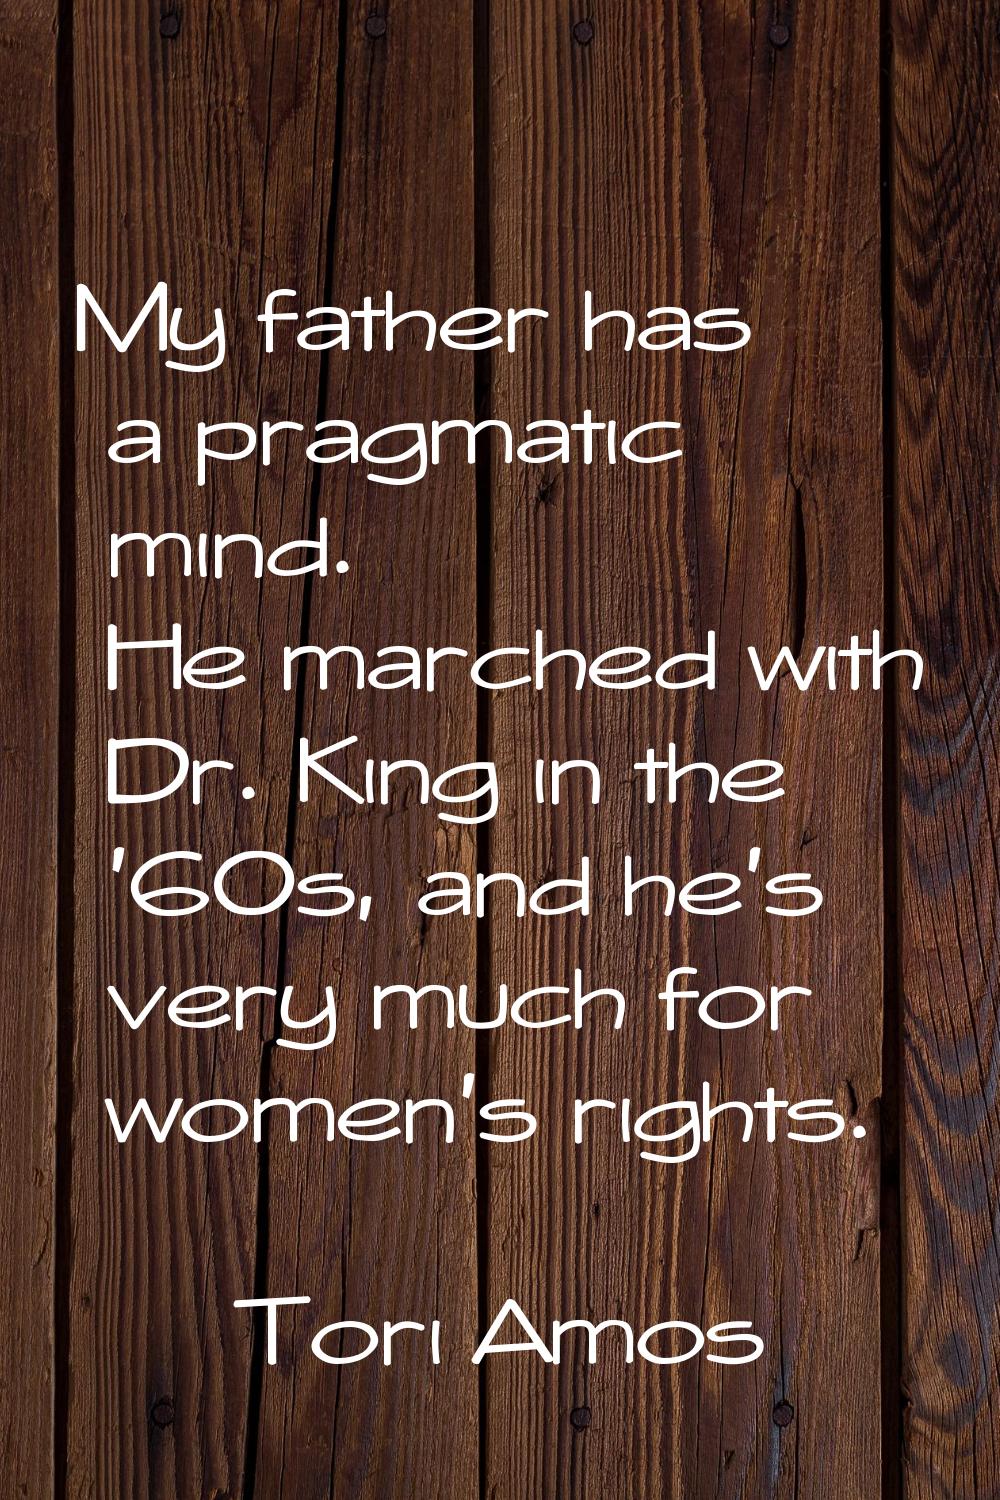 My father has a pragmatic mind. He marched with Dr. King in the '60s, and he's very much for women'